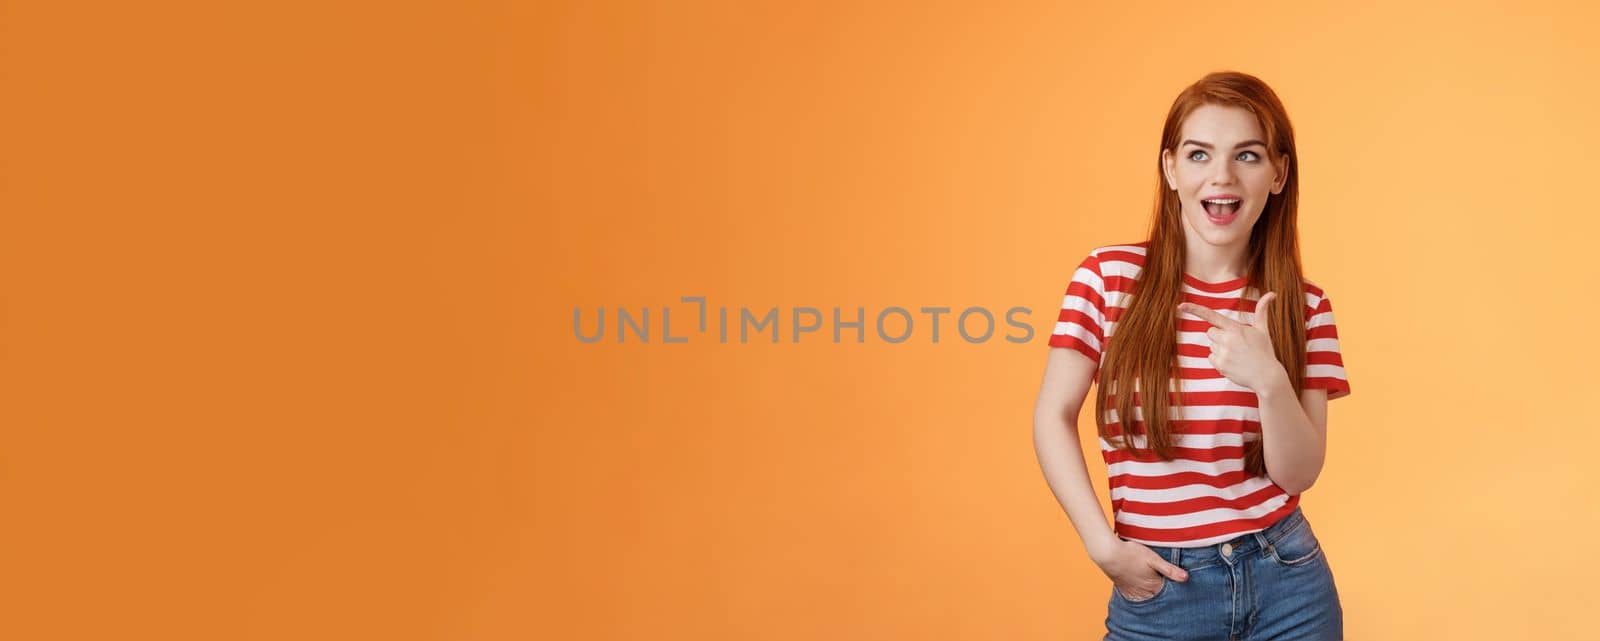 Enthusiastic amazed sassy modern redhead female attend impressive bad awesome design, look amused, observe cool place, pointing left excited, open mouth fascinated intrigued, stand orange background.